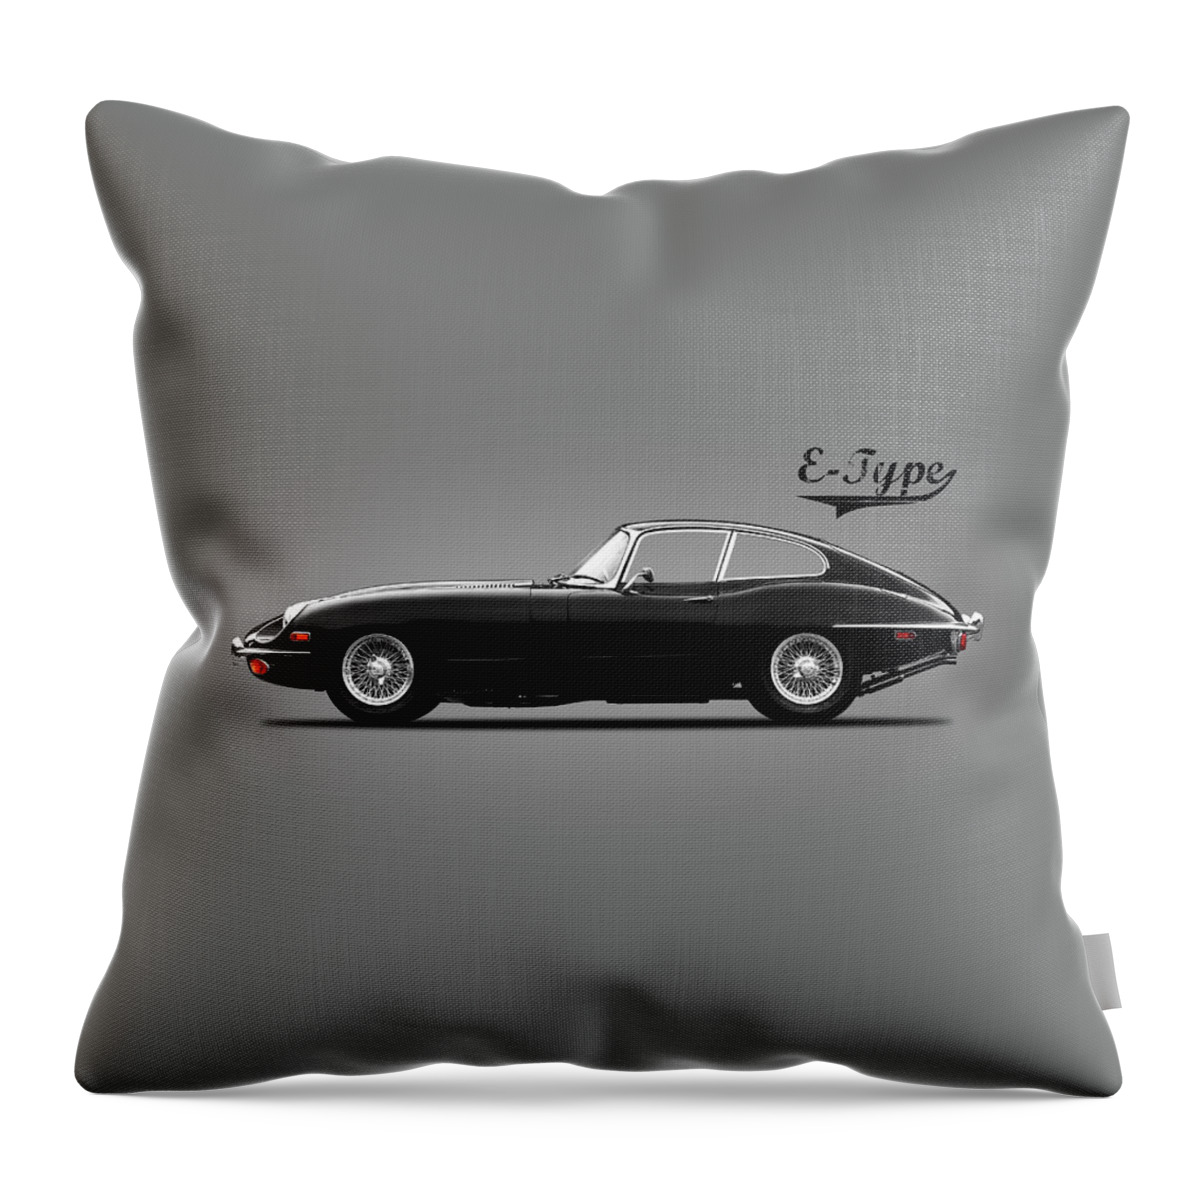 Jaguar E Type Throw Pillow featuring the photograph The E Type by Mark Rogan